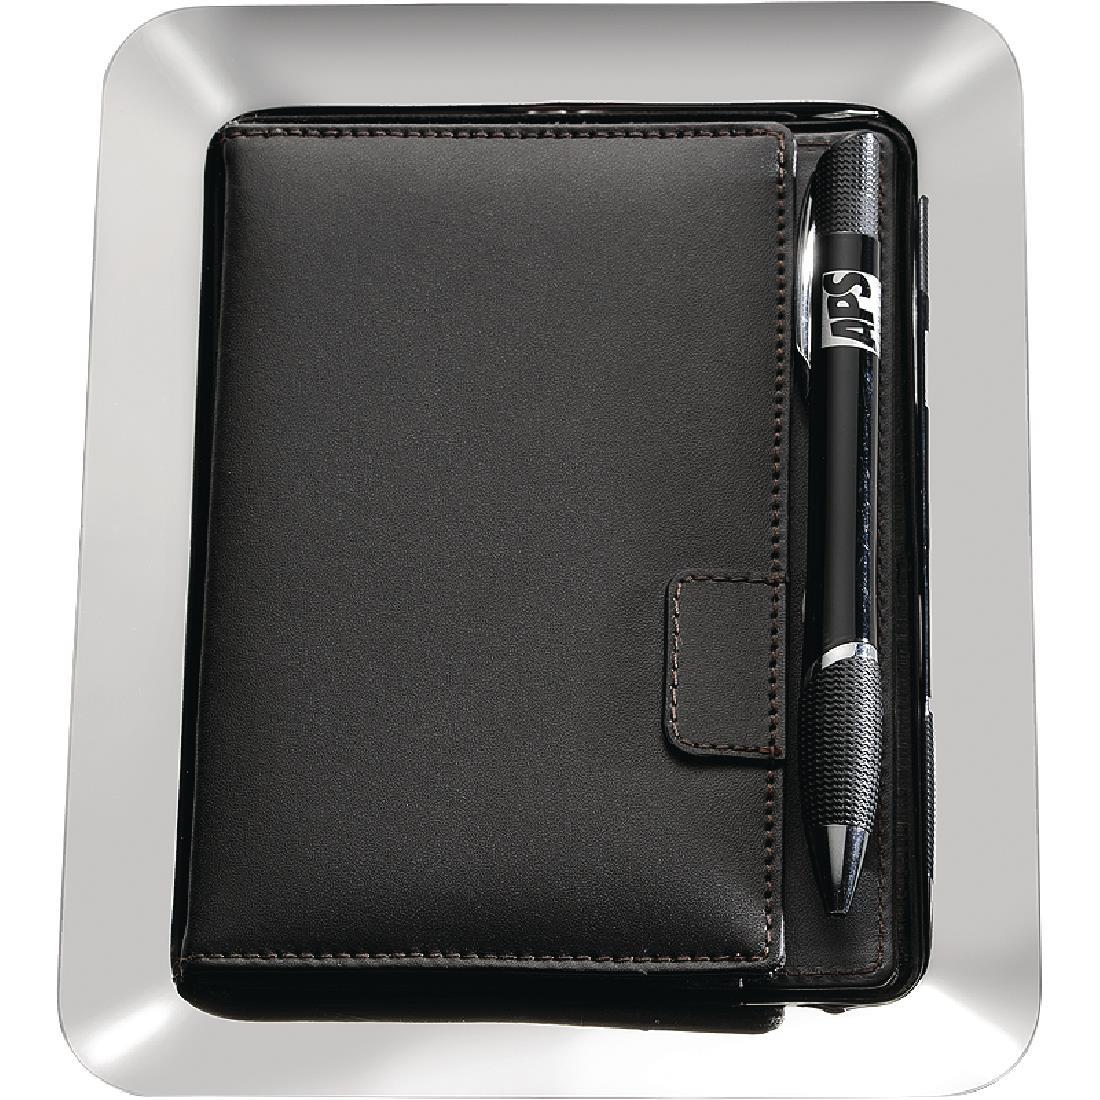 APS Stainless Steel and Leather Bill Presenter - GH406  - 2